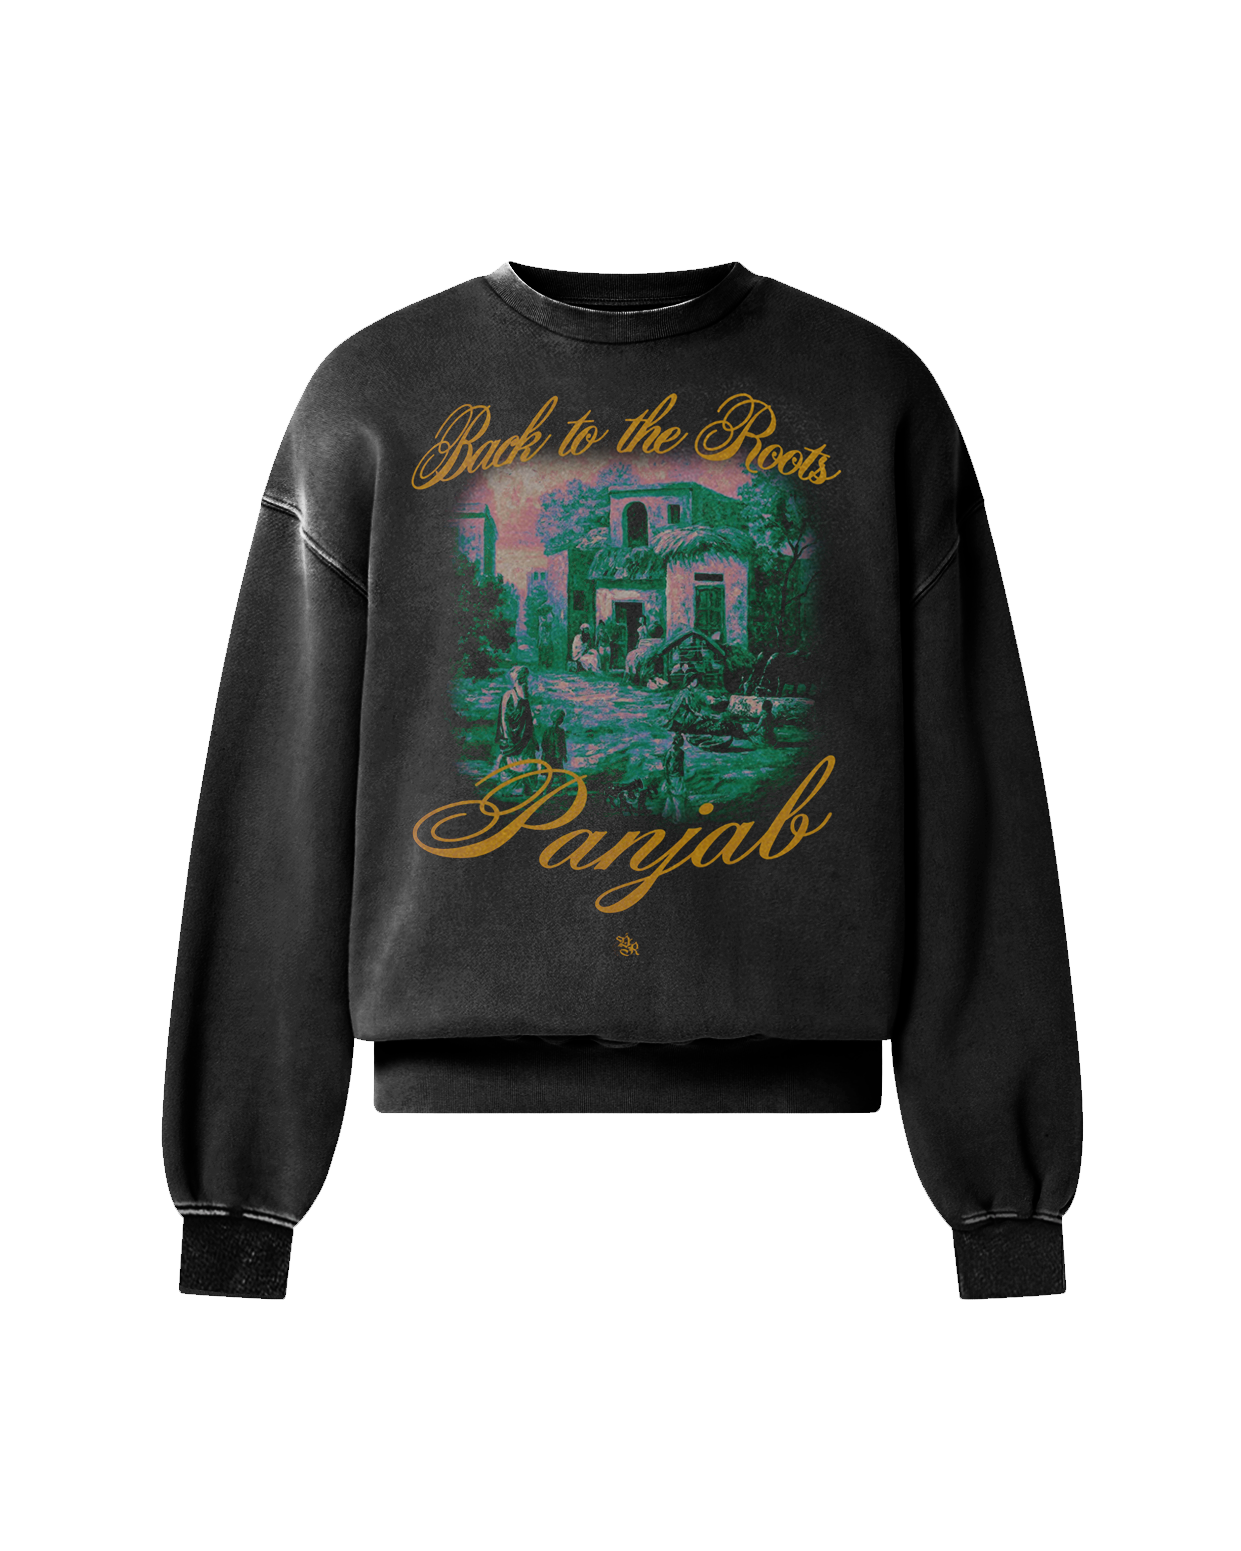 BACK TO THE ROOTS FADED SWEATSHIRT BLACK